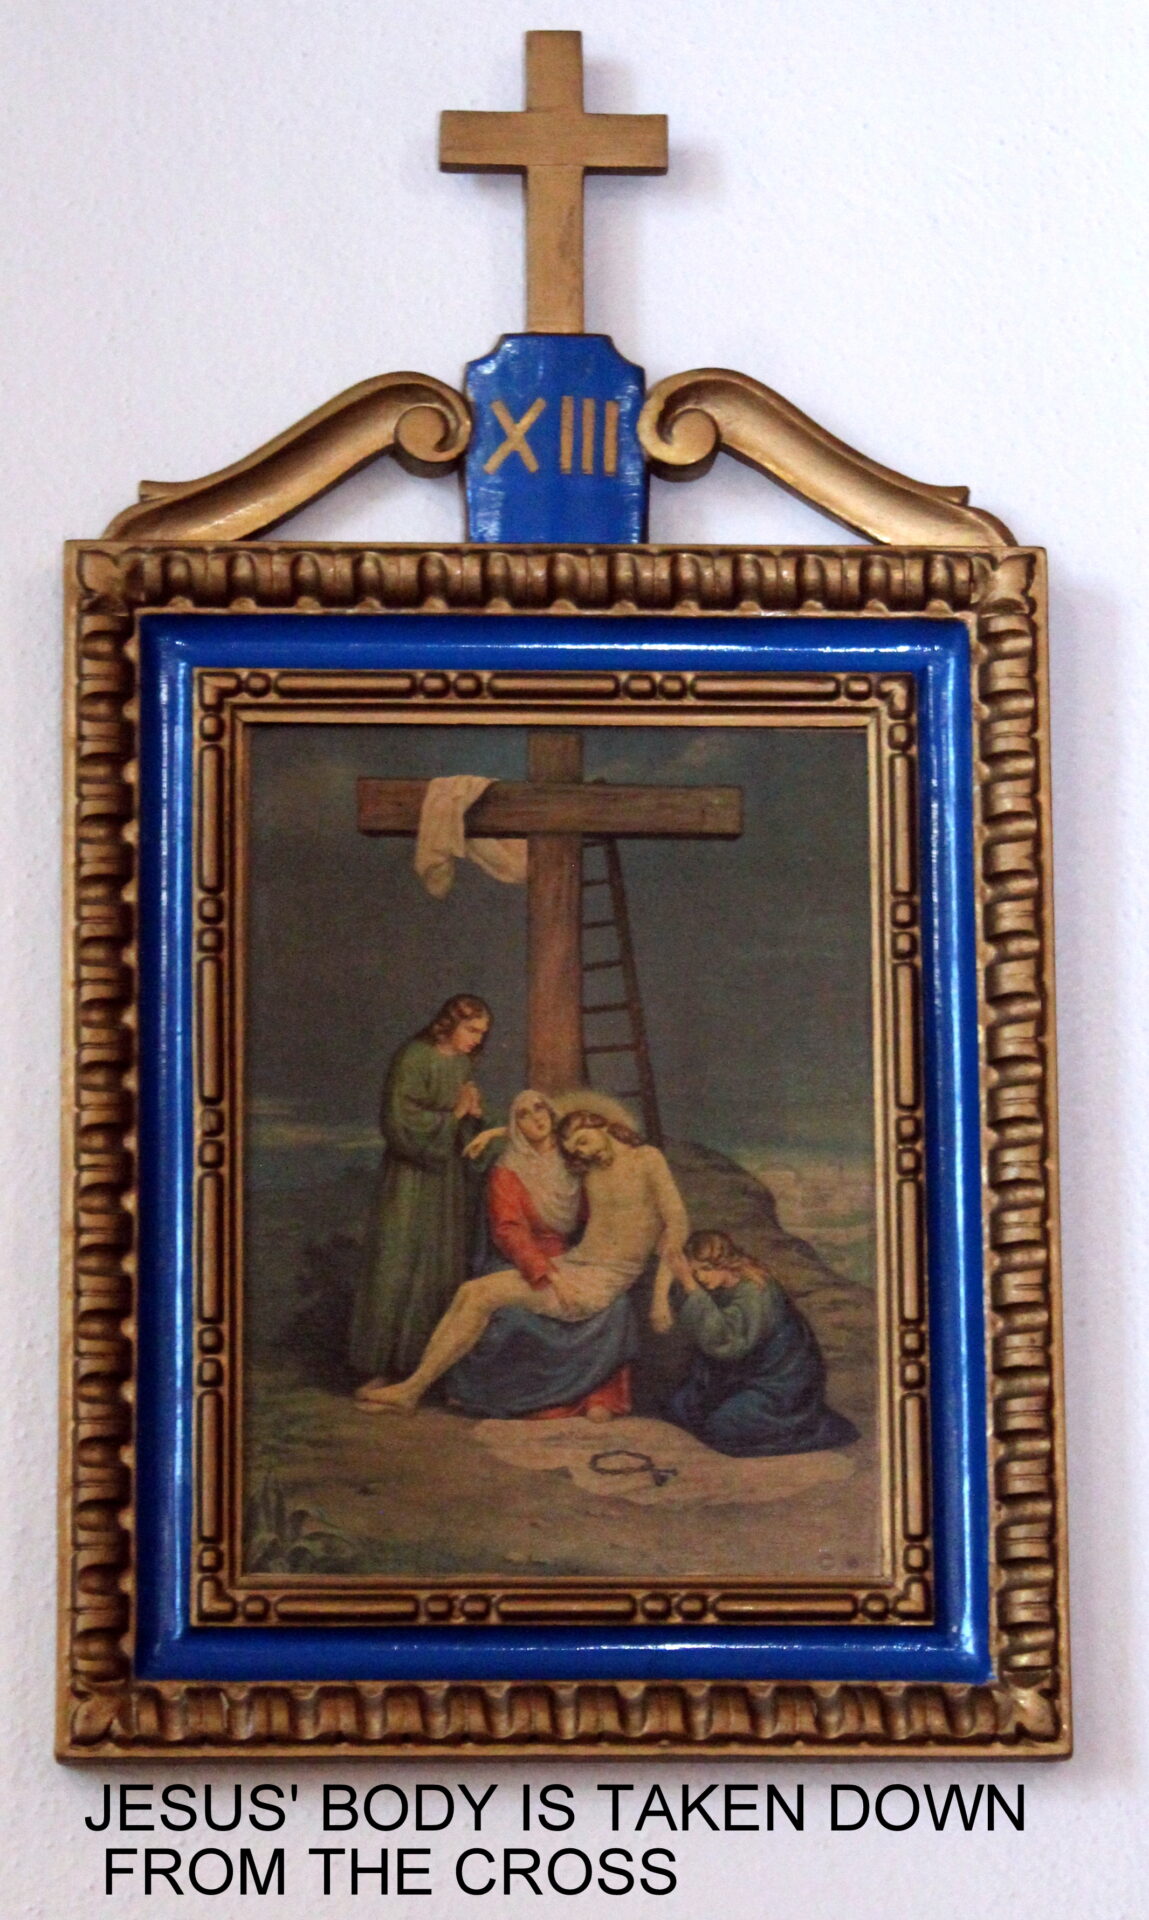 The 13th chapter of the station of the cross